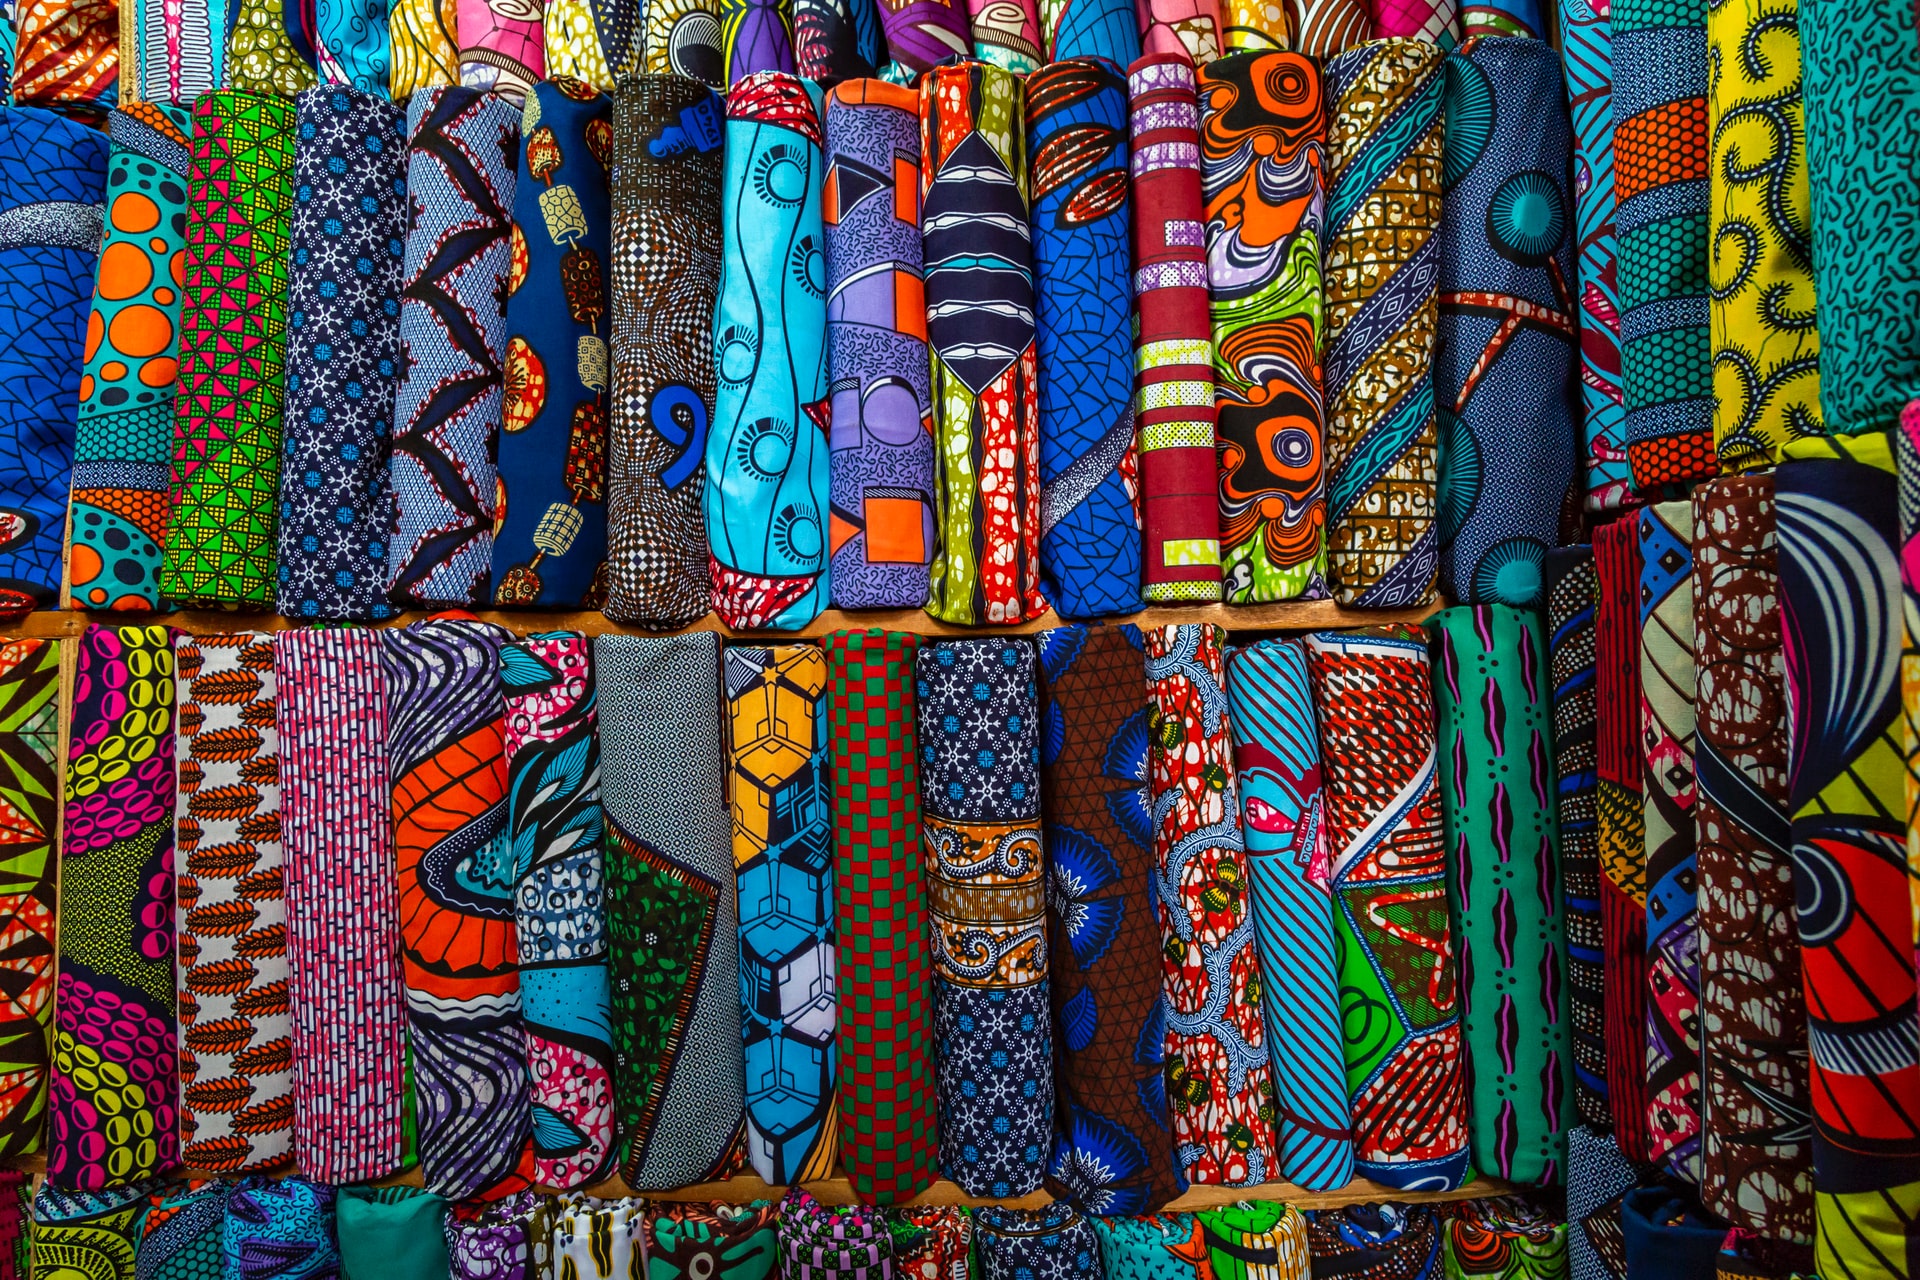 Diverse and colourful fabrics in a market. Photo by Eva Blue, Unsplash